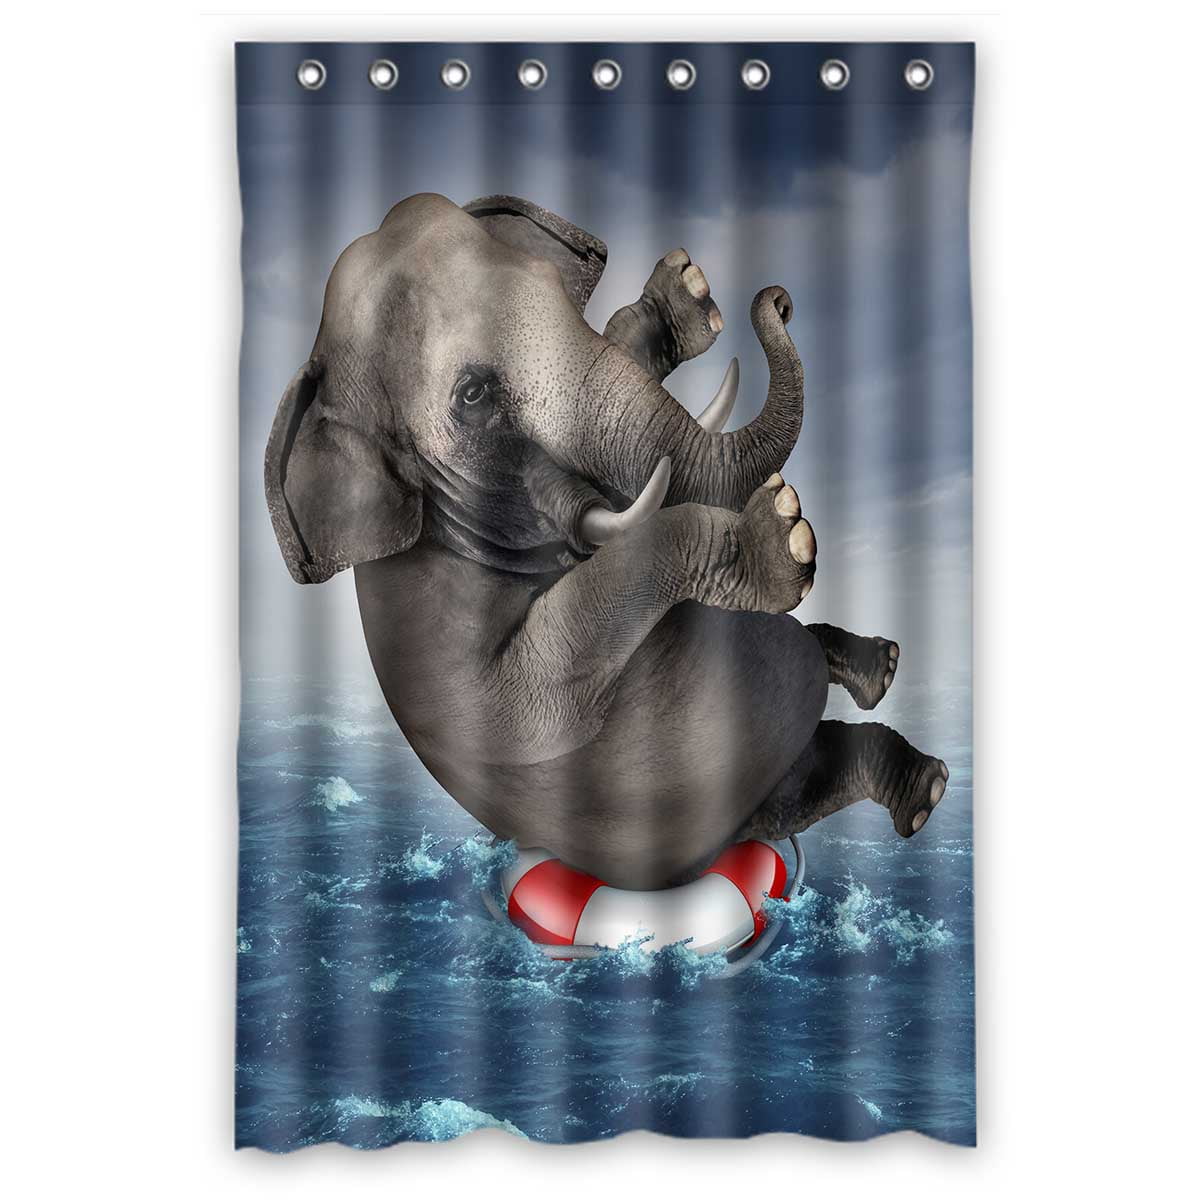 Elephant Totem Waterproof Bath Polyester Shower Curtain Liner Water Resistant 